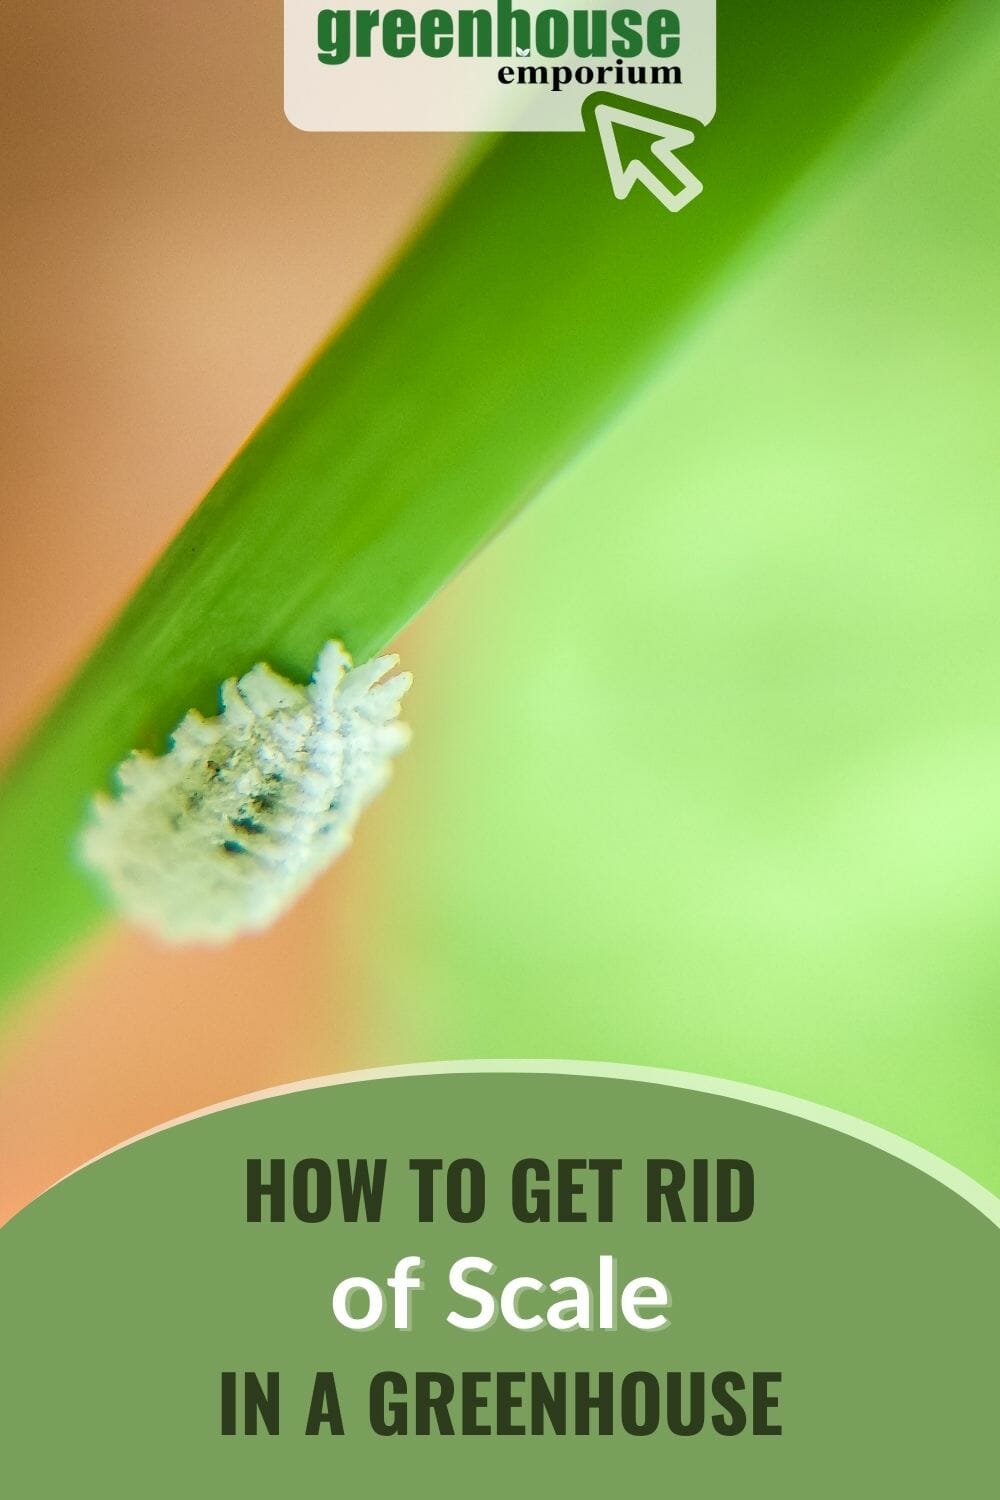 Mealybug scale in a plant with the text: How To Get Rid of Scale in a Greenhouse